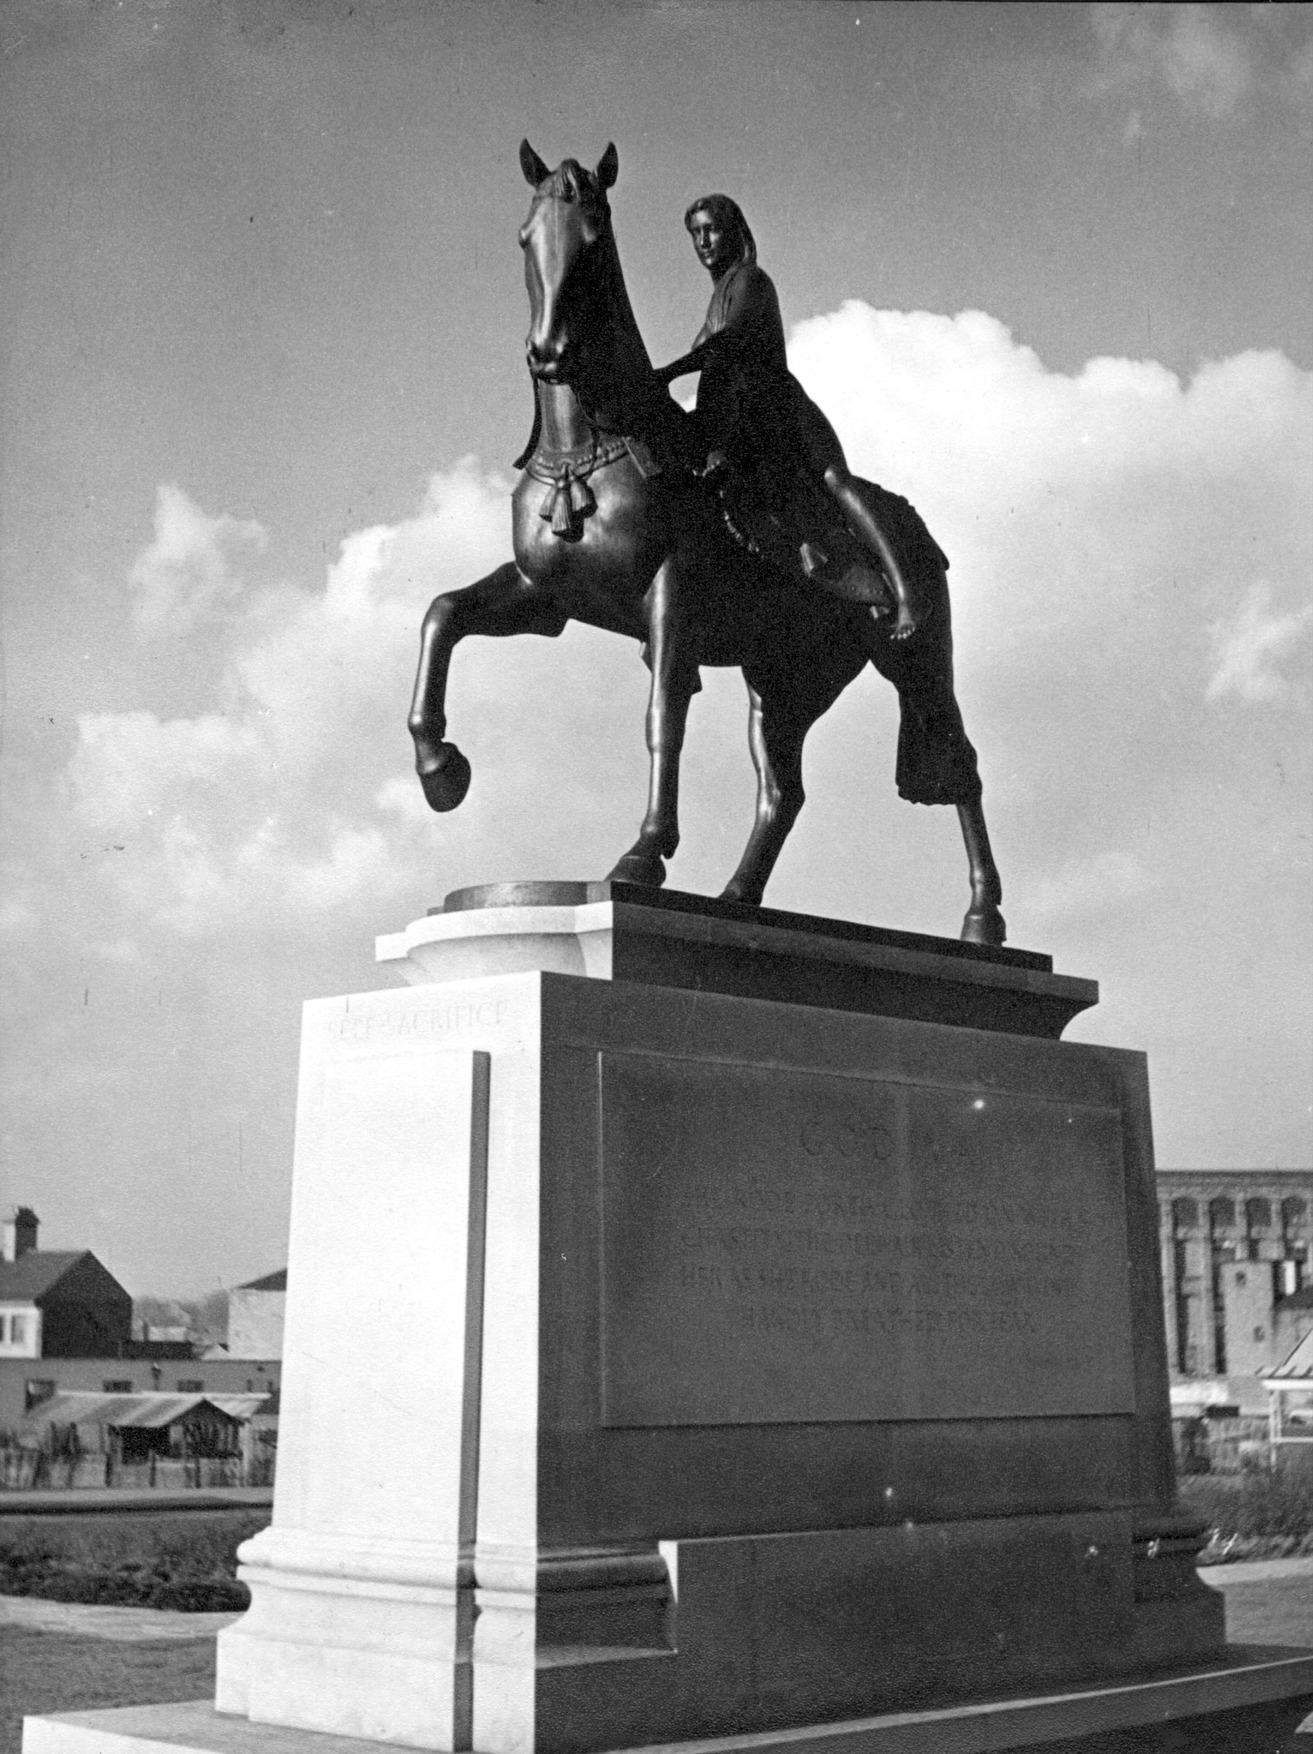 A black and white photograph of Sir William Reid Dick's statue of Lady Godiva on horseback, situated in Broadgate, Coventry city centre.